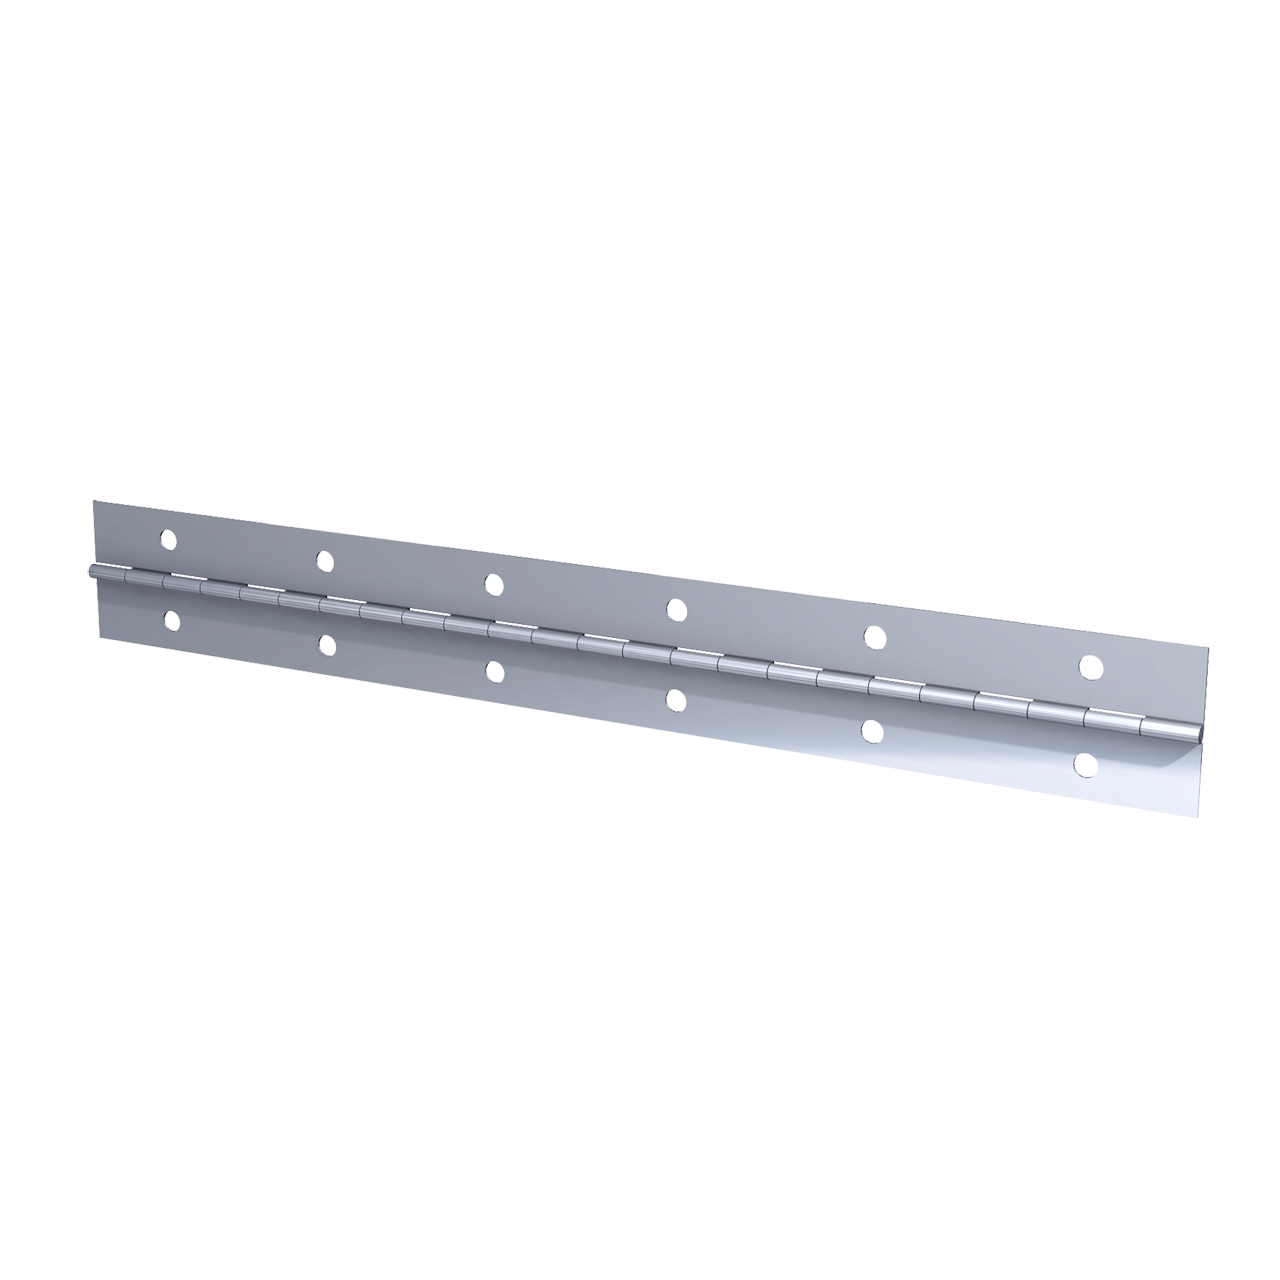 Continuous Friction Piano Hinge